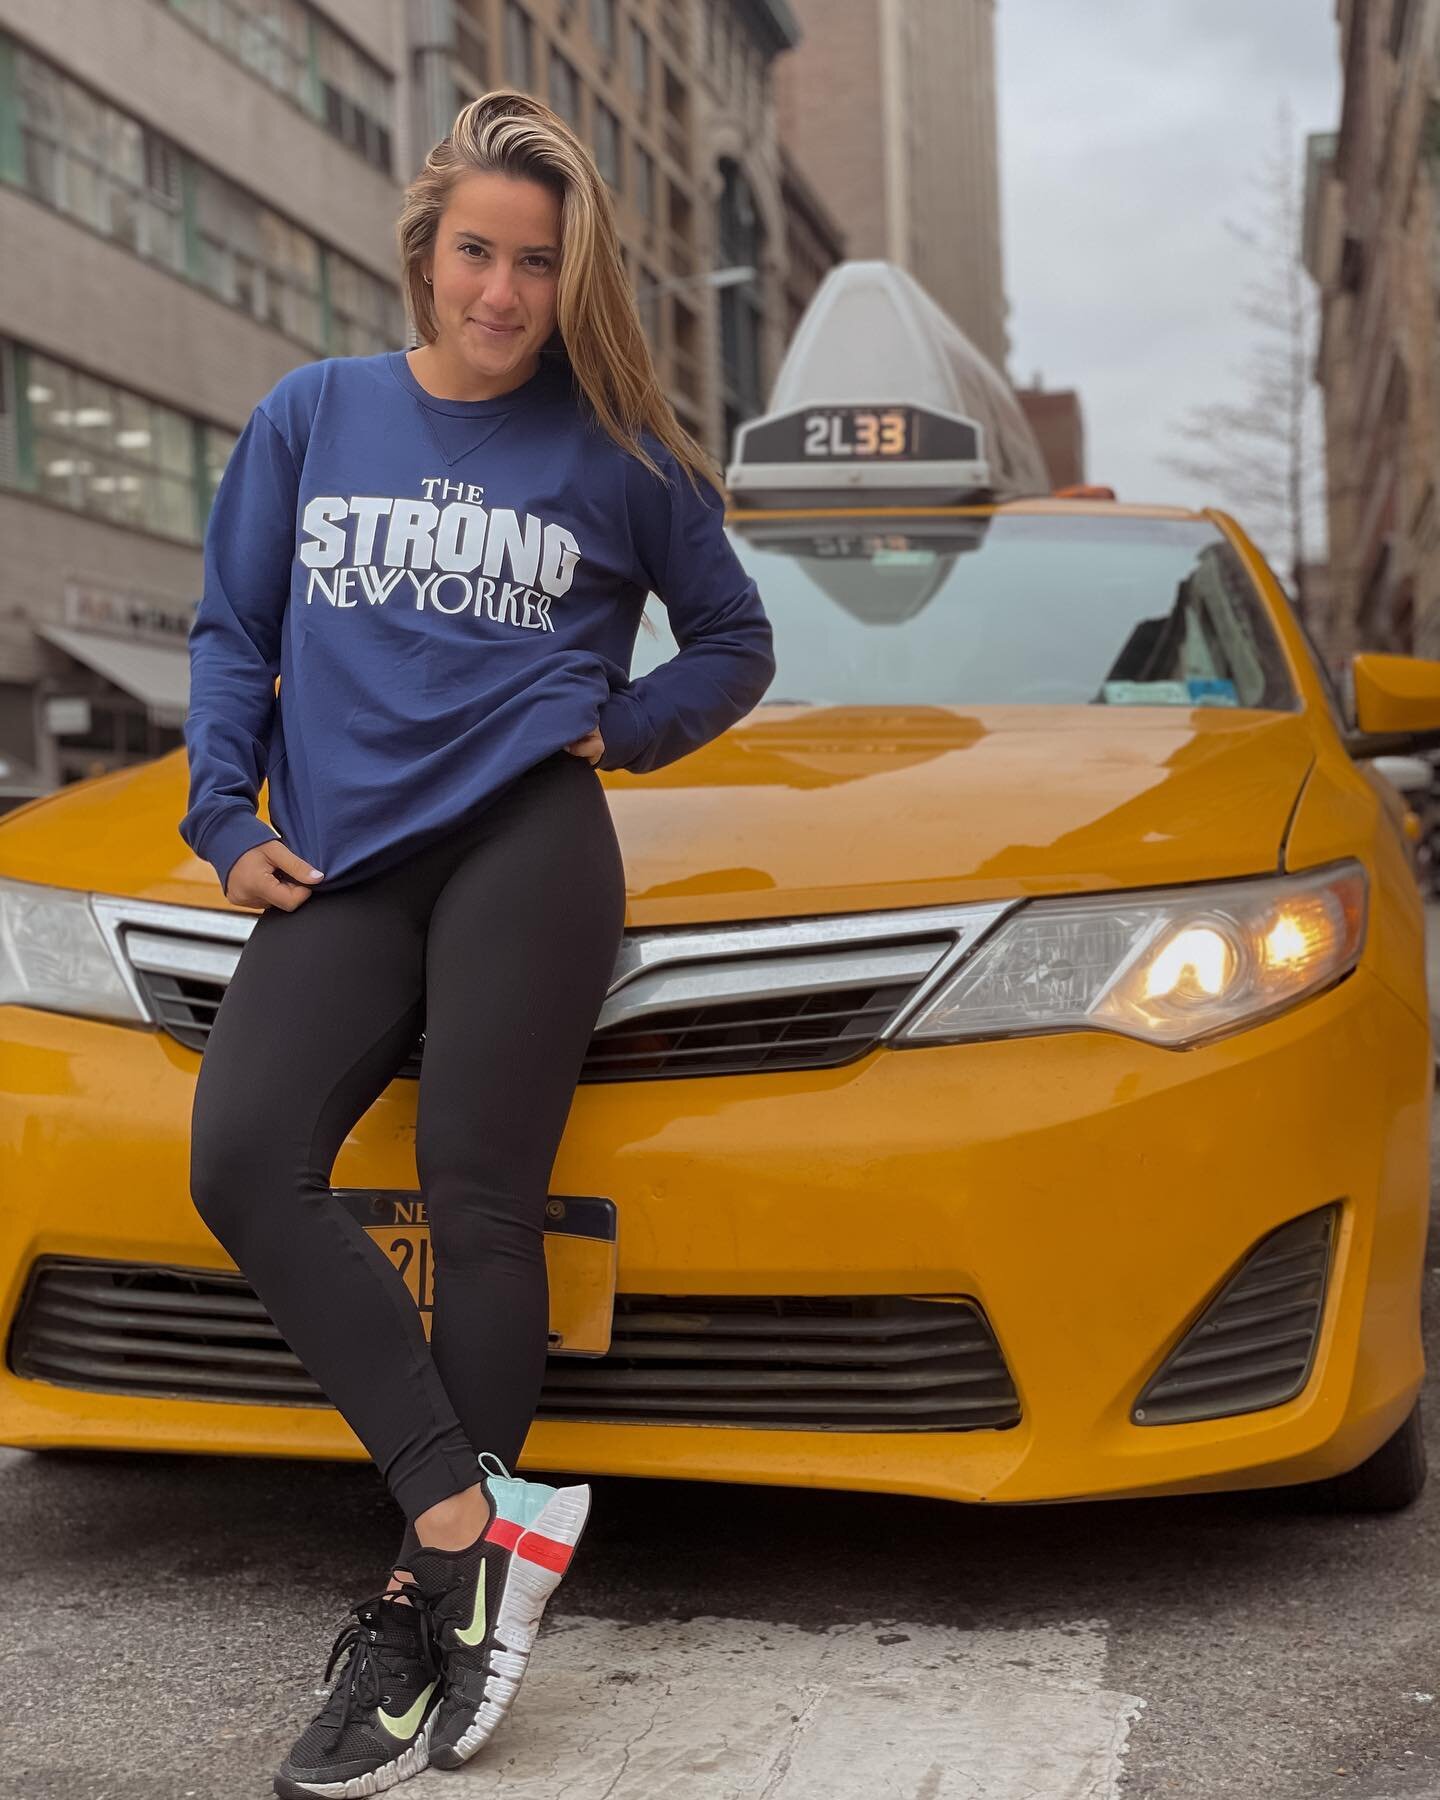 Home of the hip-hop, yellow cab, gypsy cab, dollar cab, holla back 👊🏻⚡️

@goodlifeclothing X STRONG NEW YORK EXCLUSIVE COLLAB IS LIVE.

SHOP NOW THROUGH IG OR THE LINK IN OUR BIO. HURRY LIMITED RUN.
#strongnewyork #goodlifeclothing